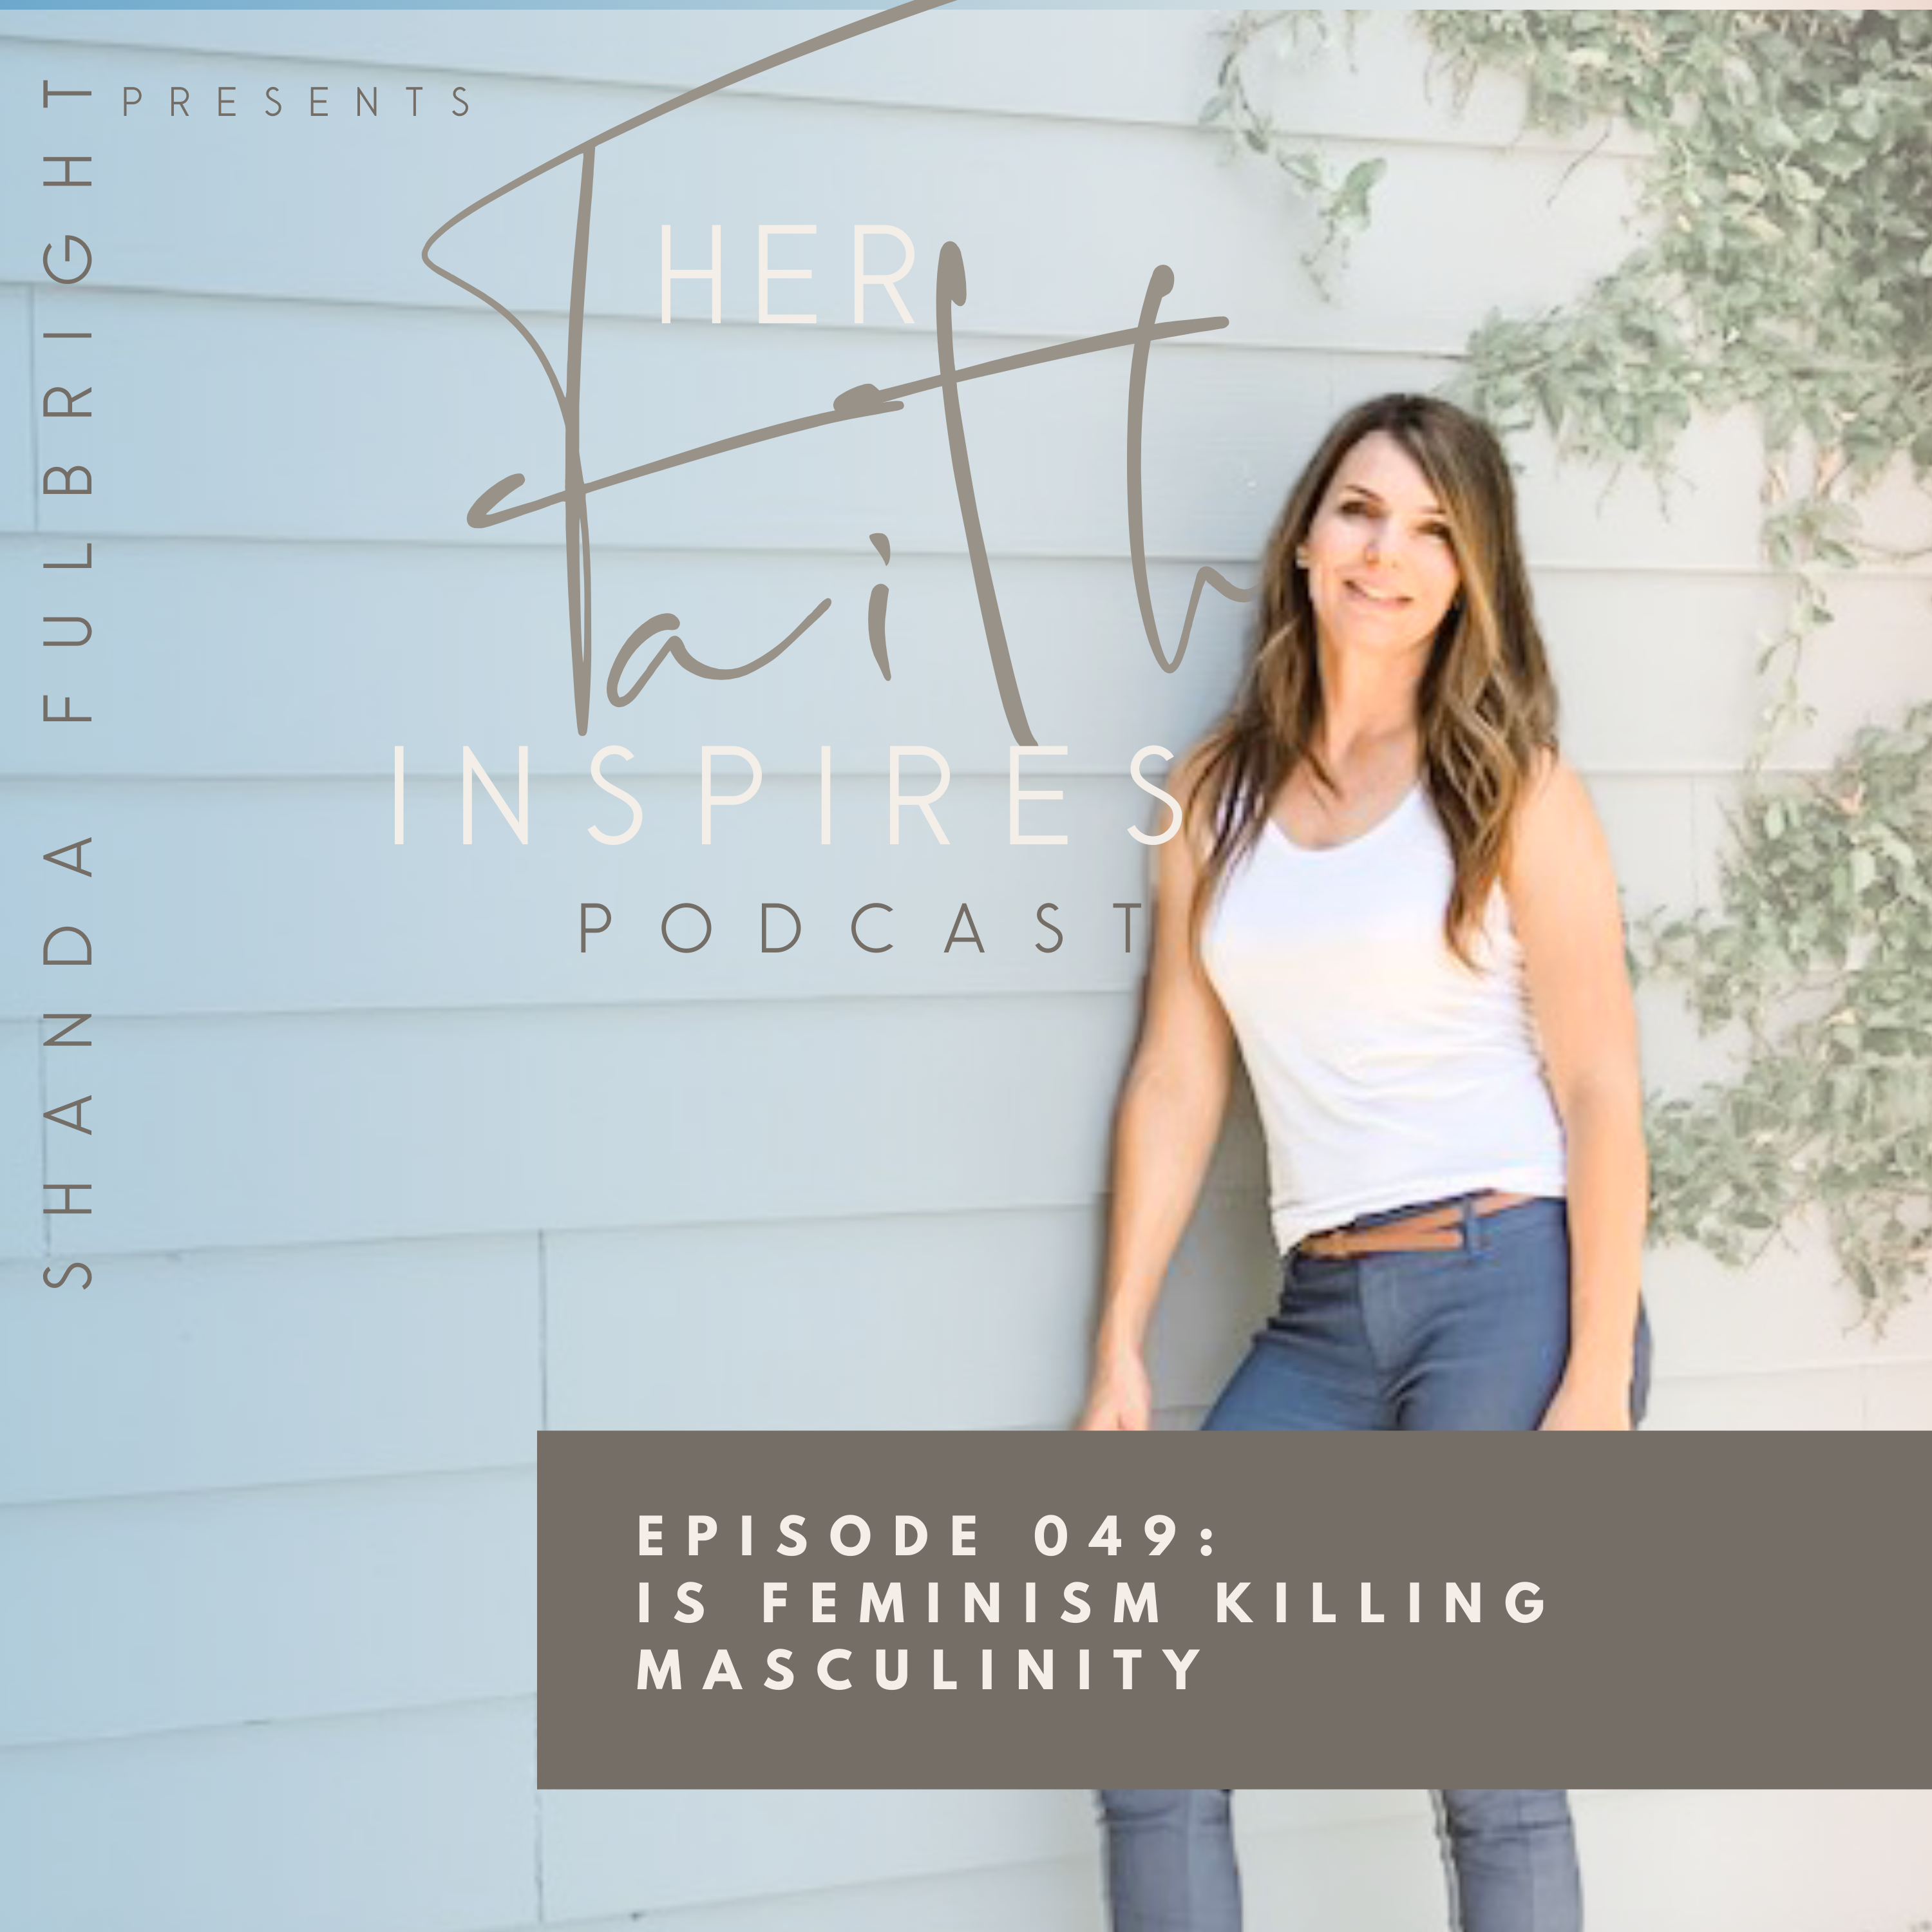 SF Podcast Episode 49 - HER FAITH INSPIRES 049 : Is feminism killing masculinty